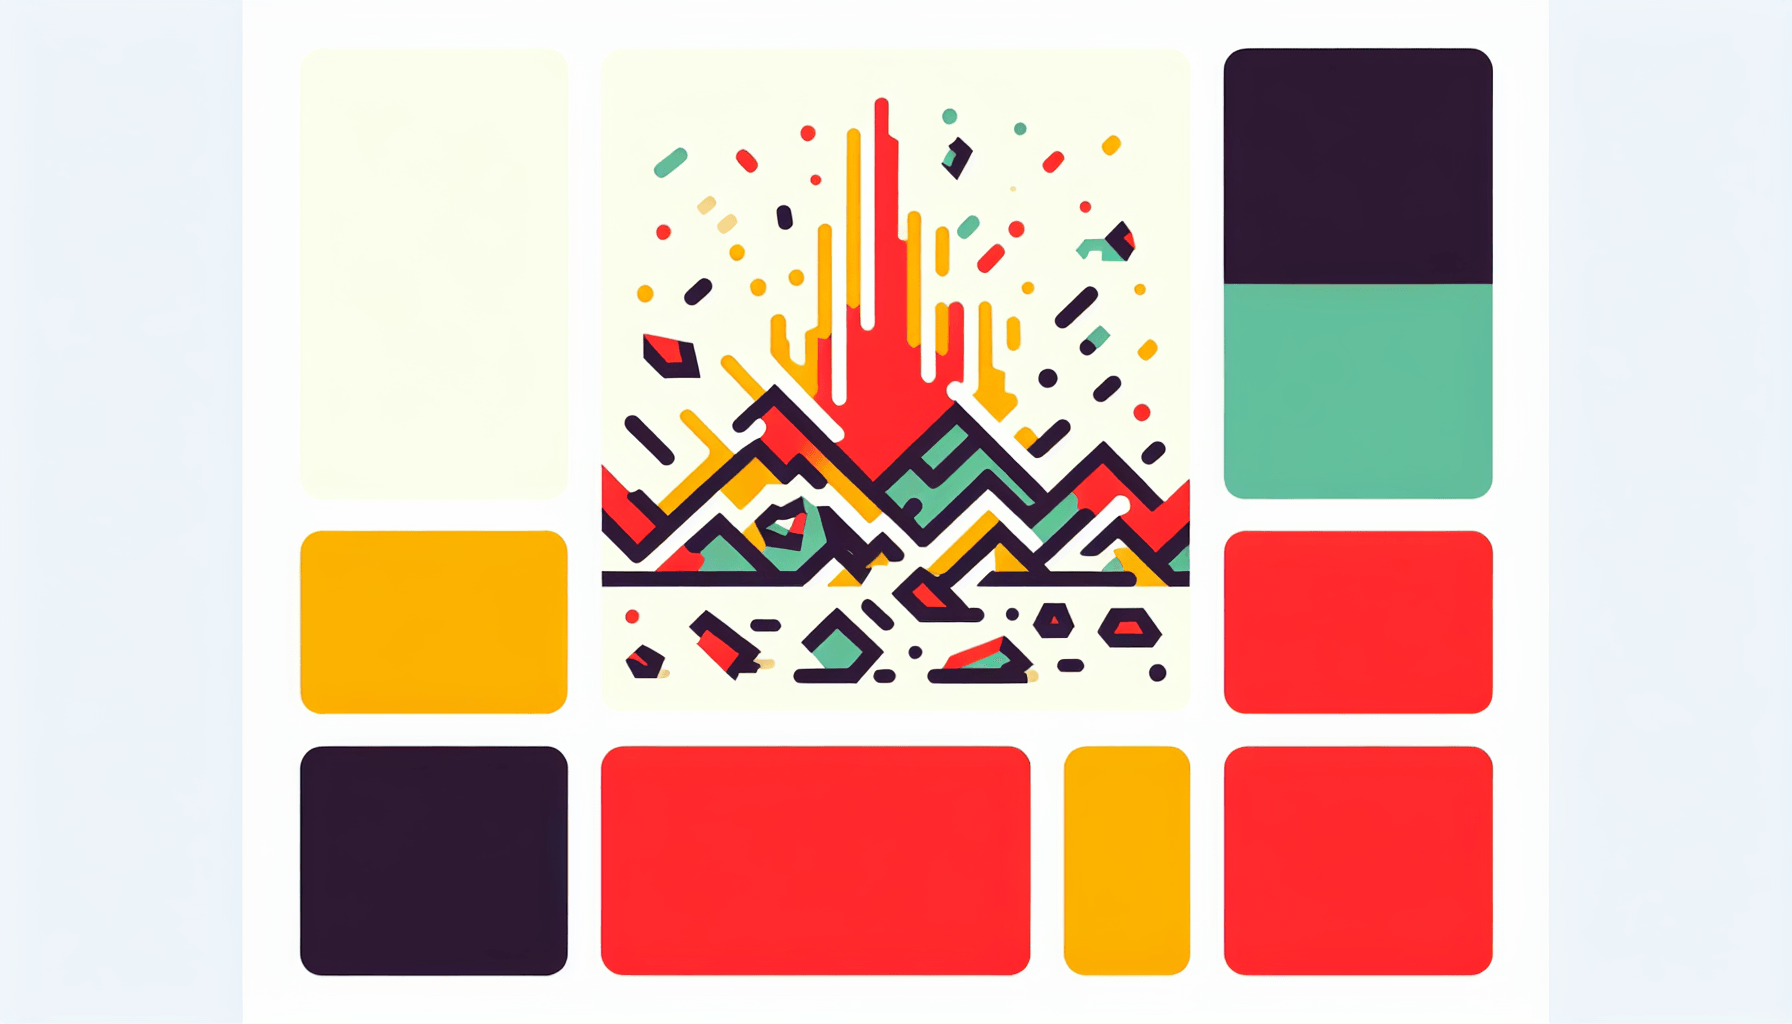 Earthquake in flat illustration style and white background, red #f47574, green #88c7a8, yellow #fcc44b, and blue #645bc8 colors.